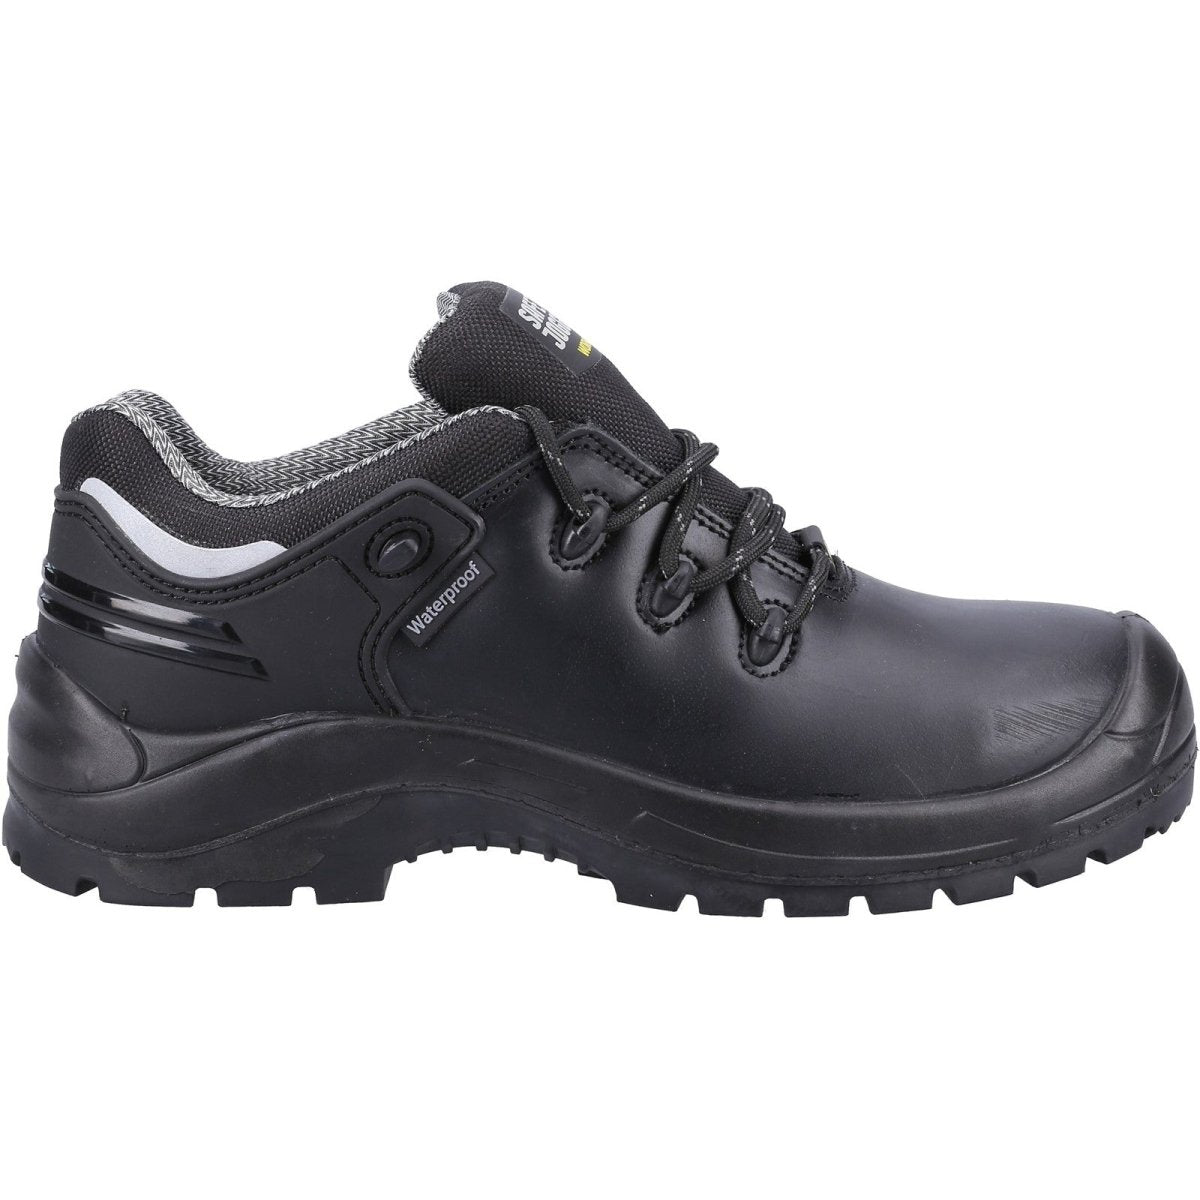 Safety Jogger X330 S3 Safety Shoes - Shoe Store Direct